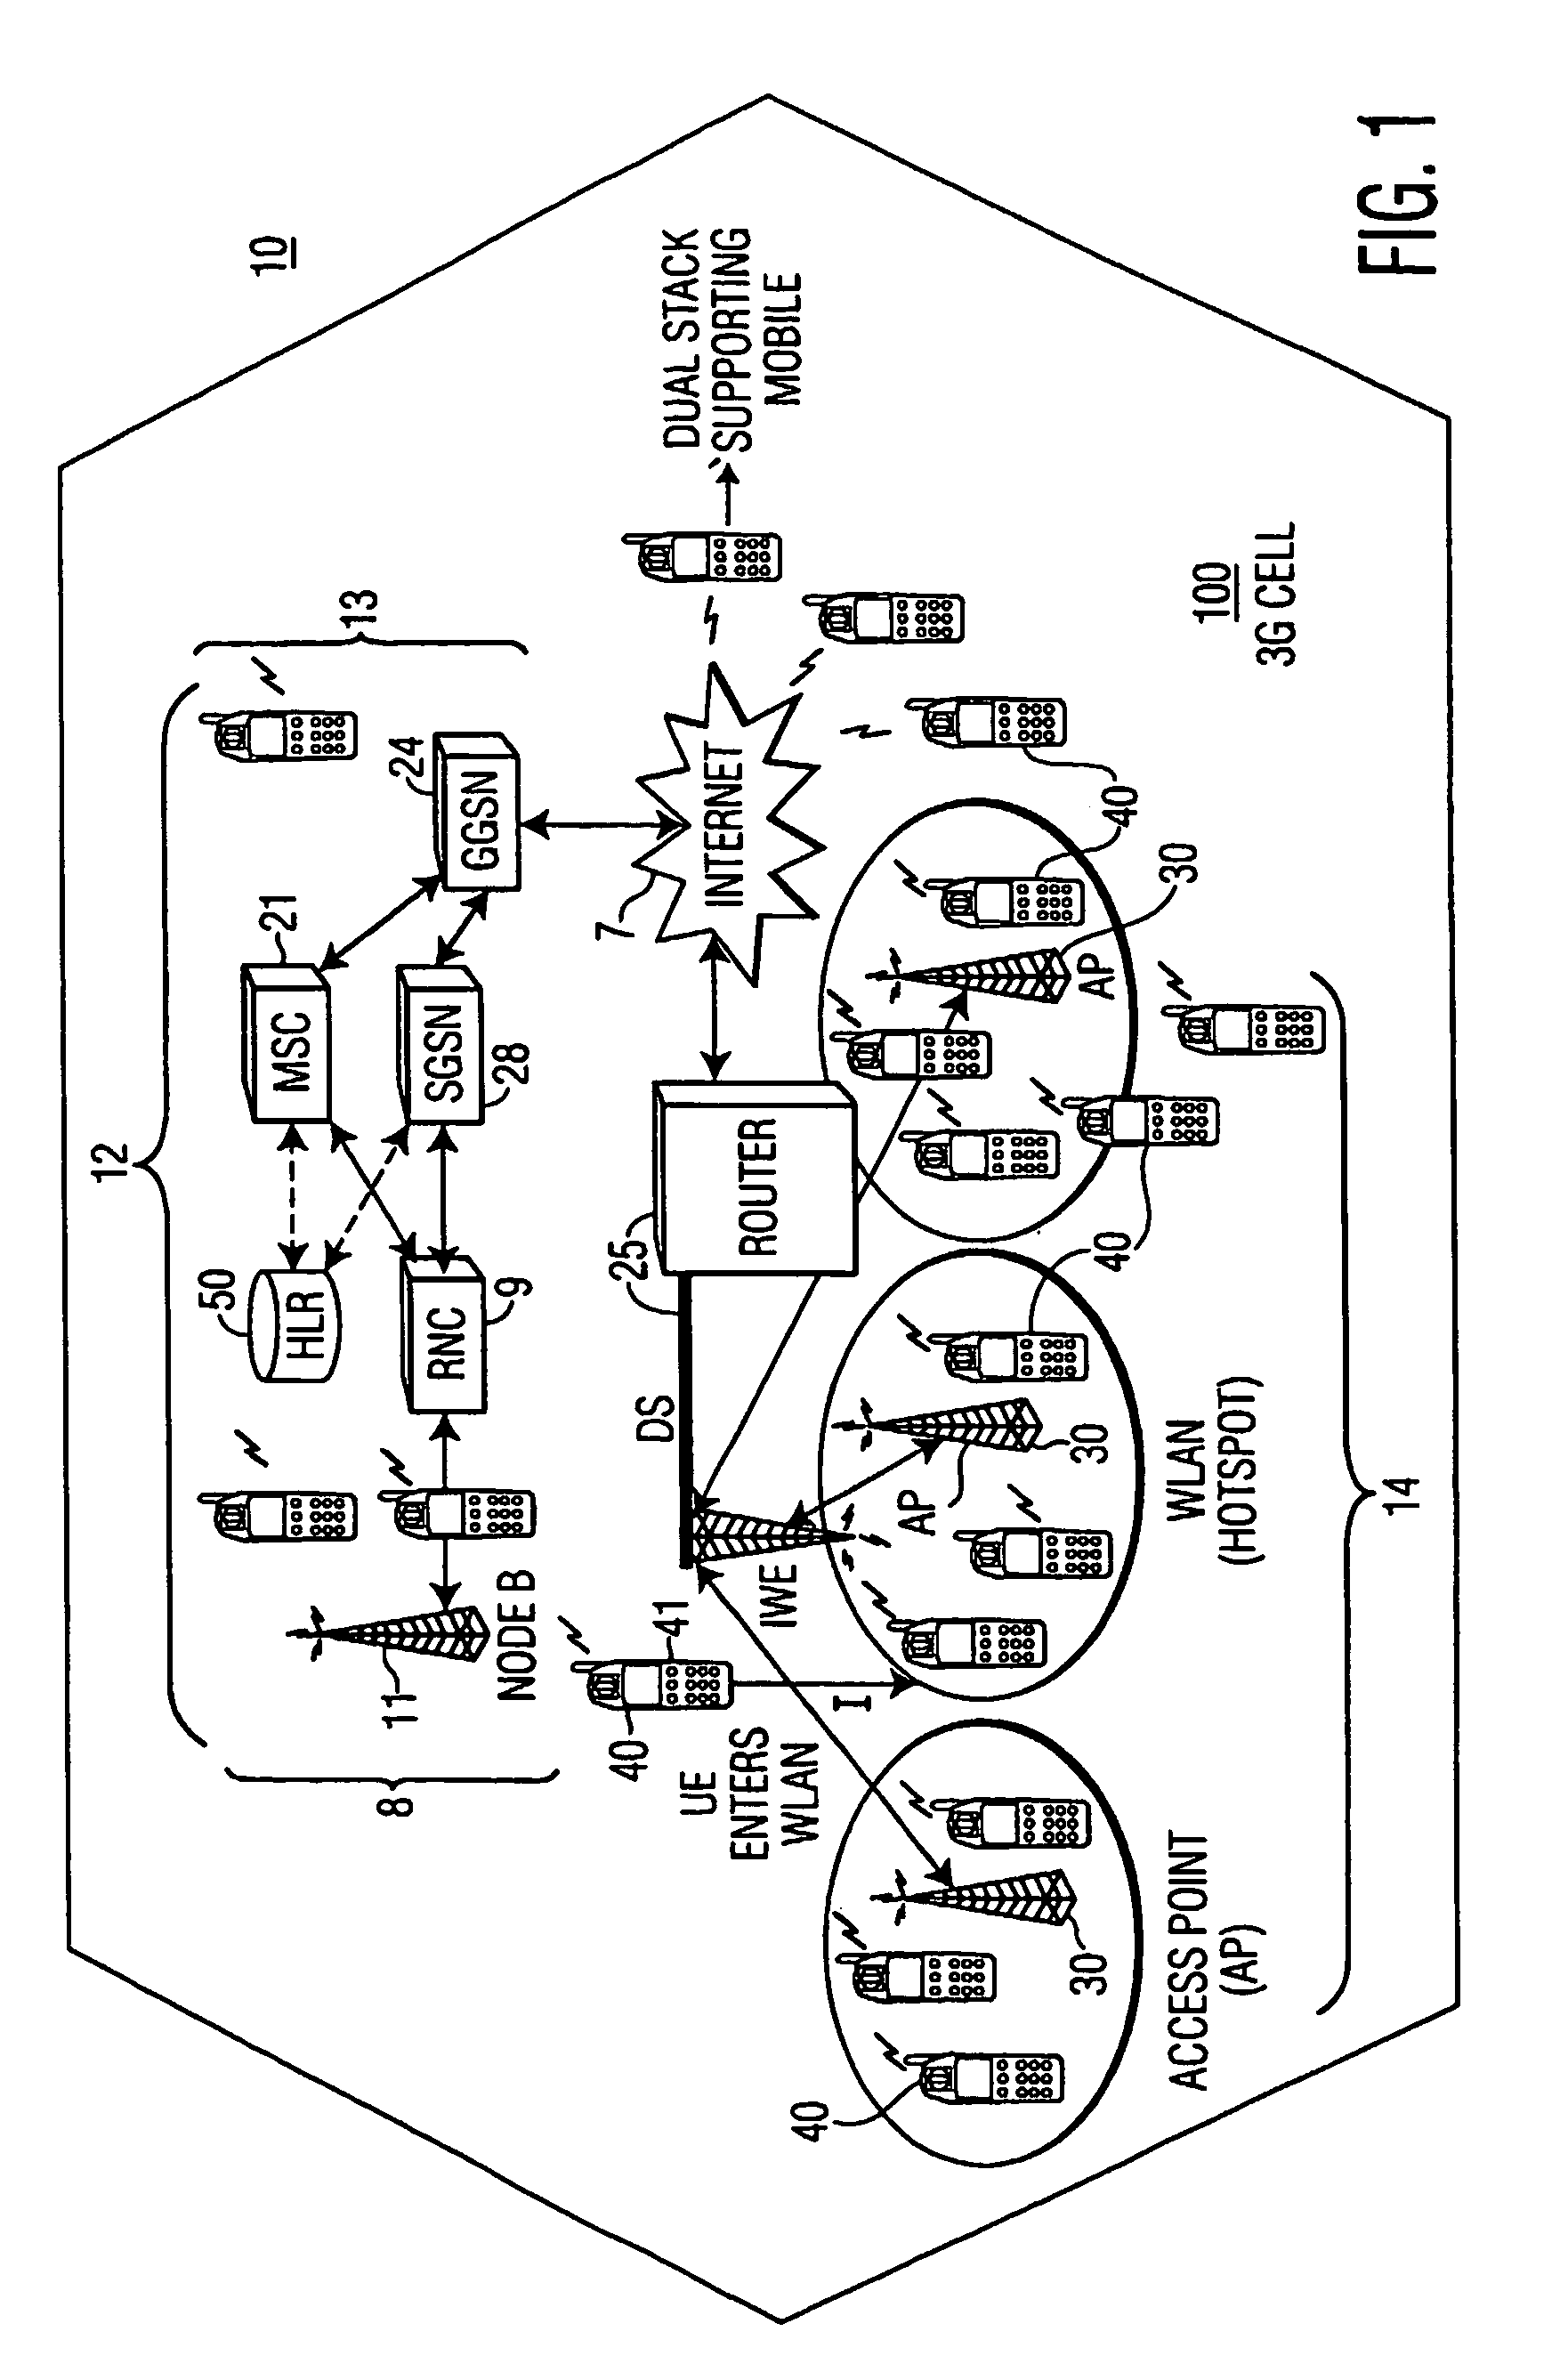 Registration of a wlan as a umts routing area for wlan-umts interworking